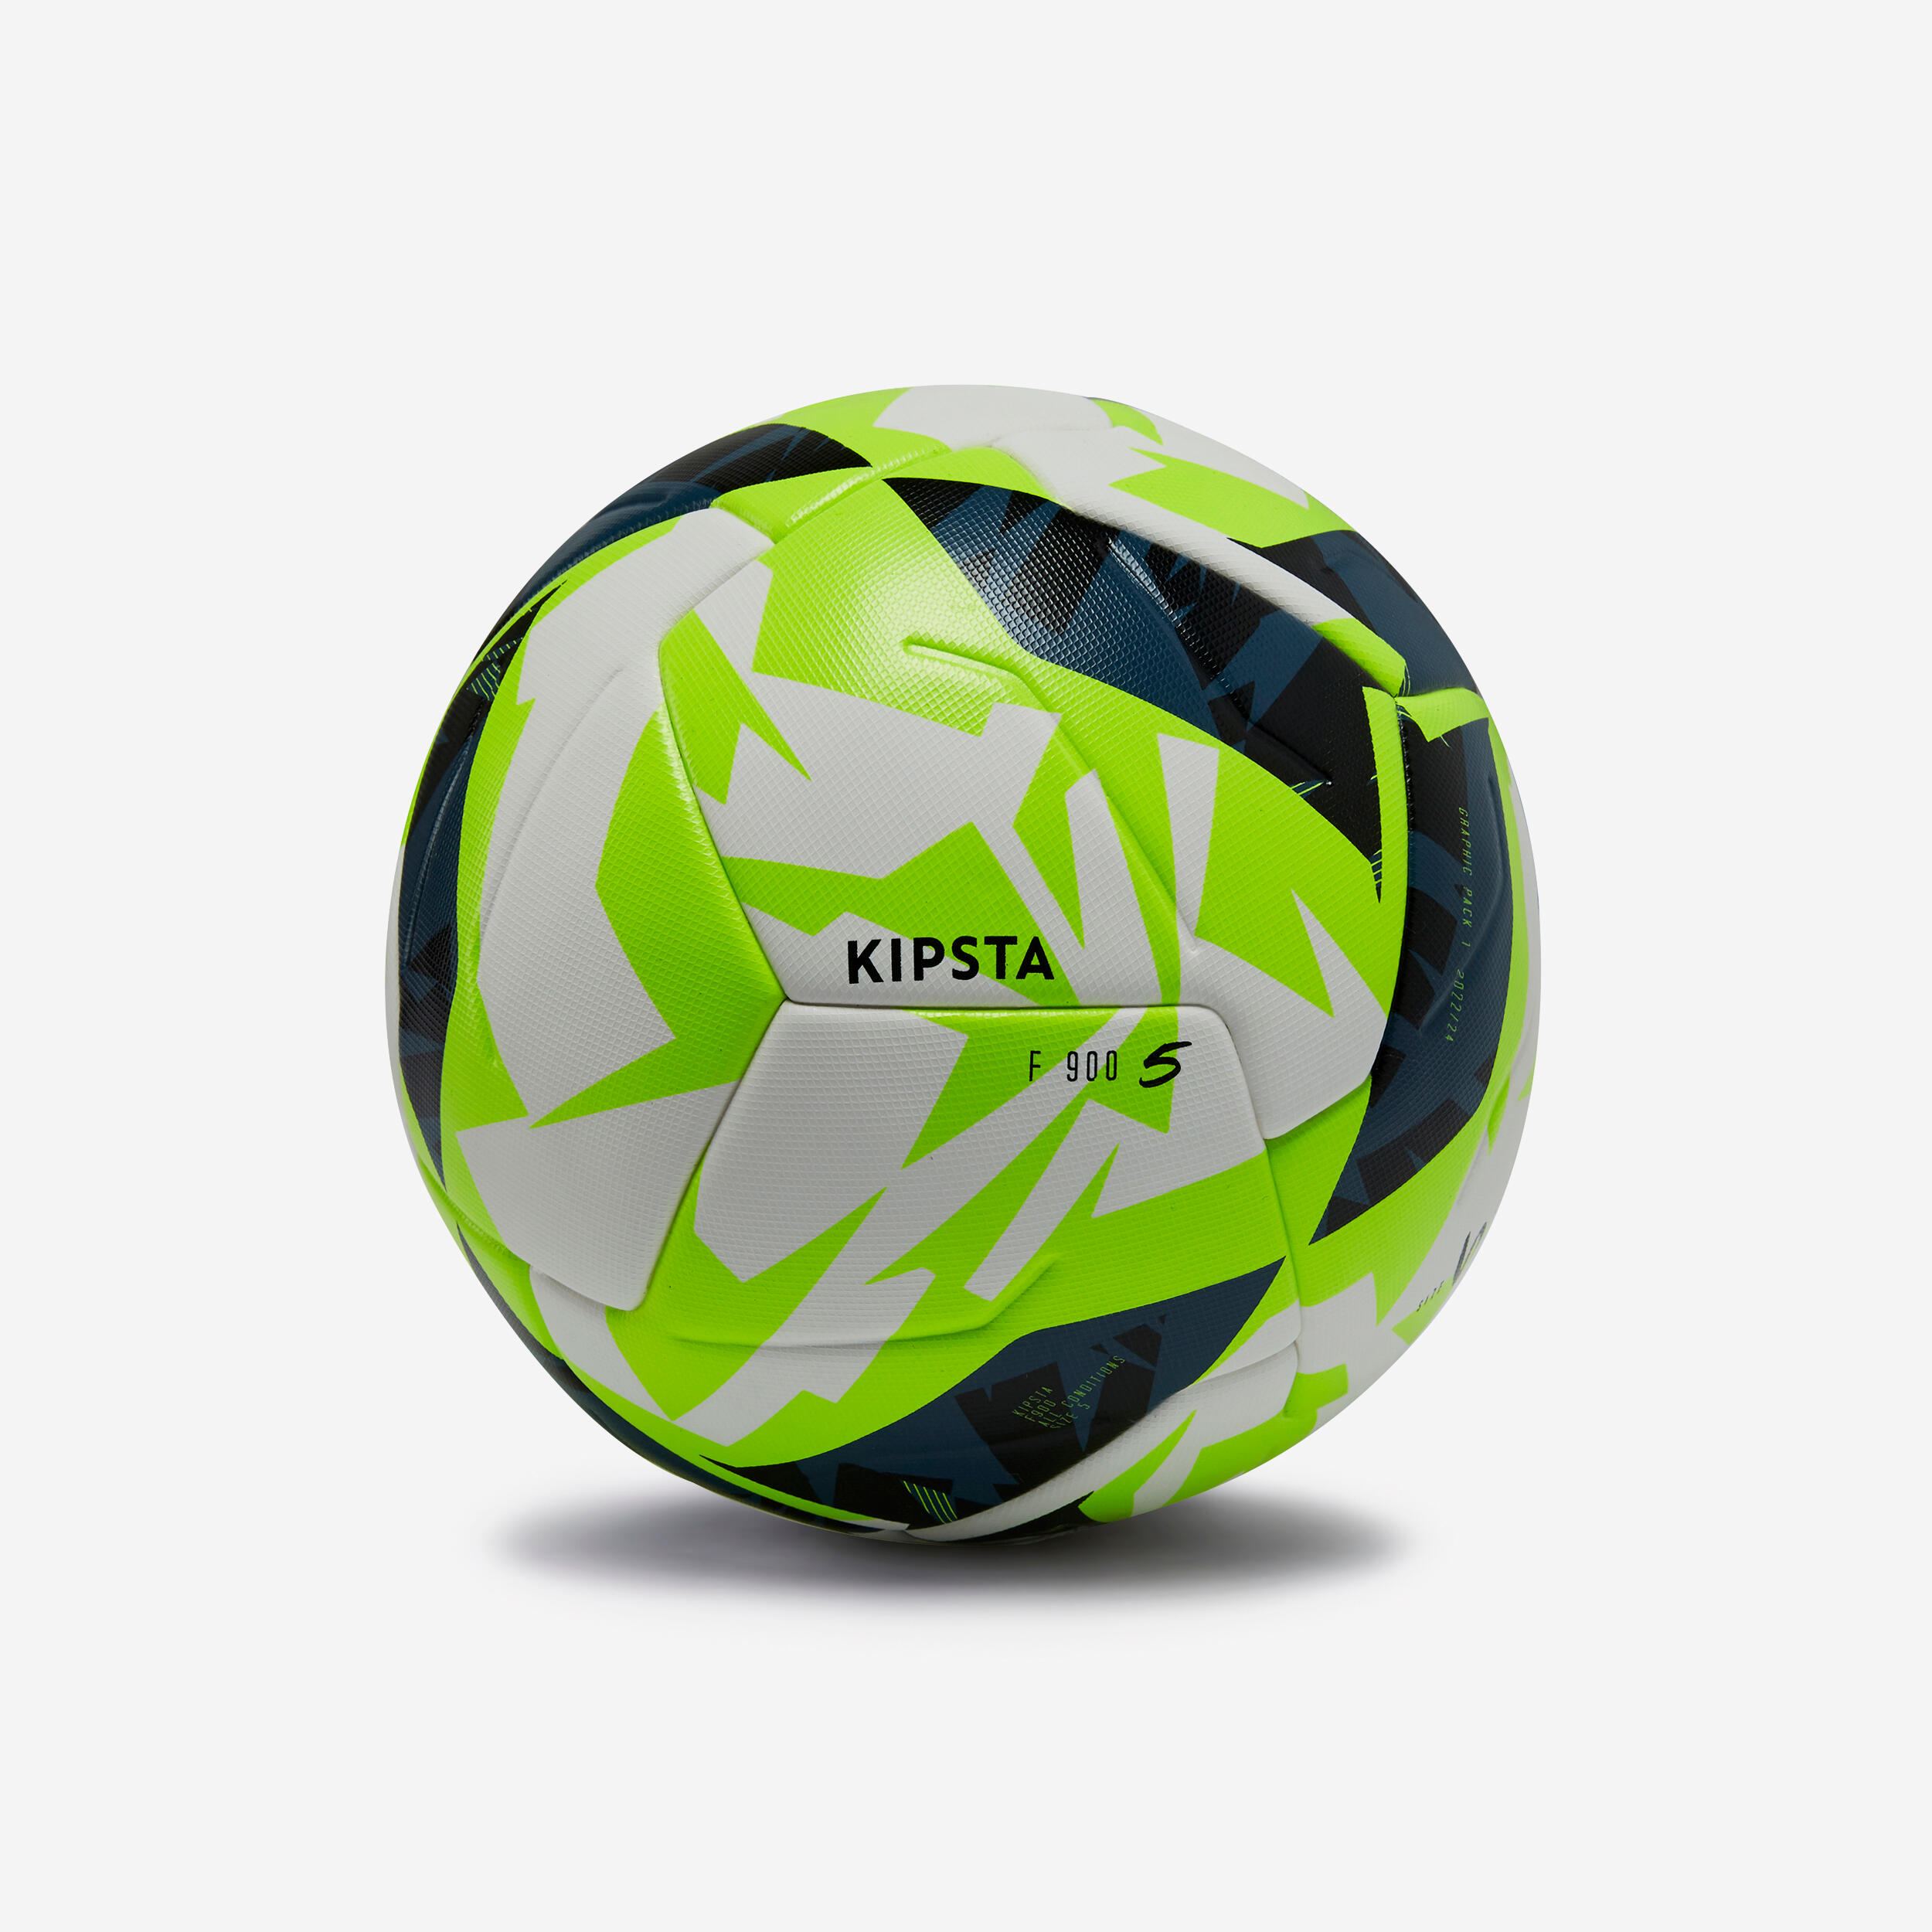 Kipsta Thermobonded Size 5 Football Fifa Quality Pro F900 - White/yellow